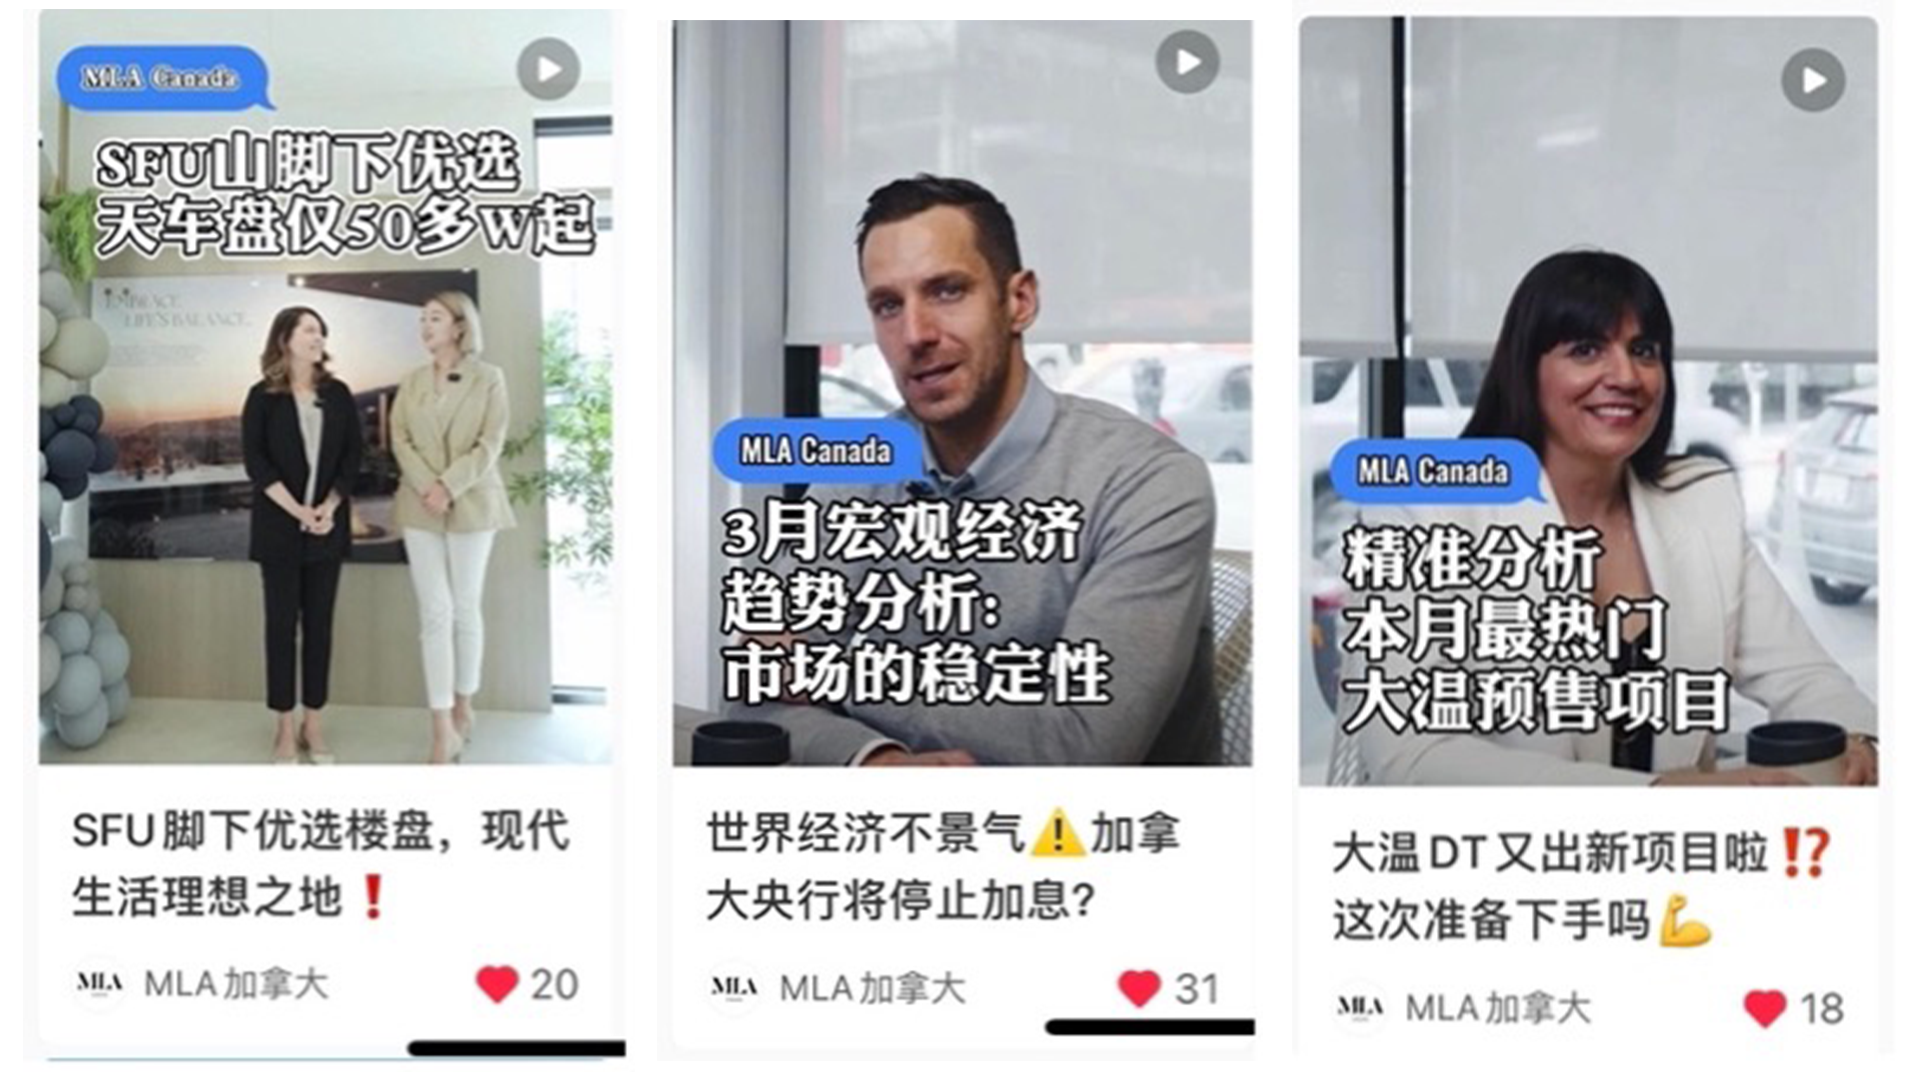 MLA Canada Chinese Social Media Content